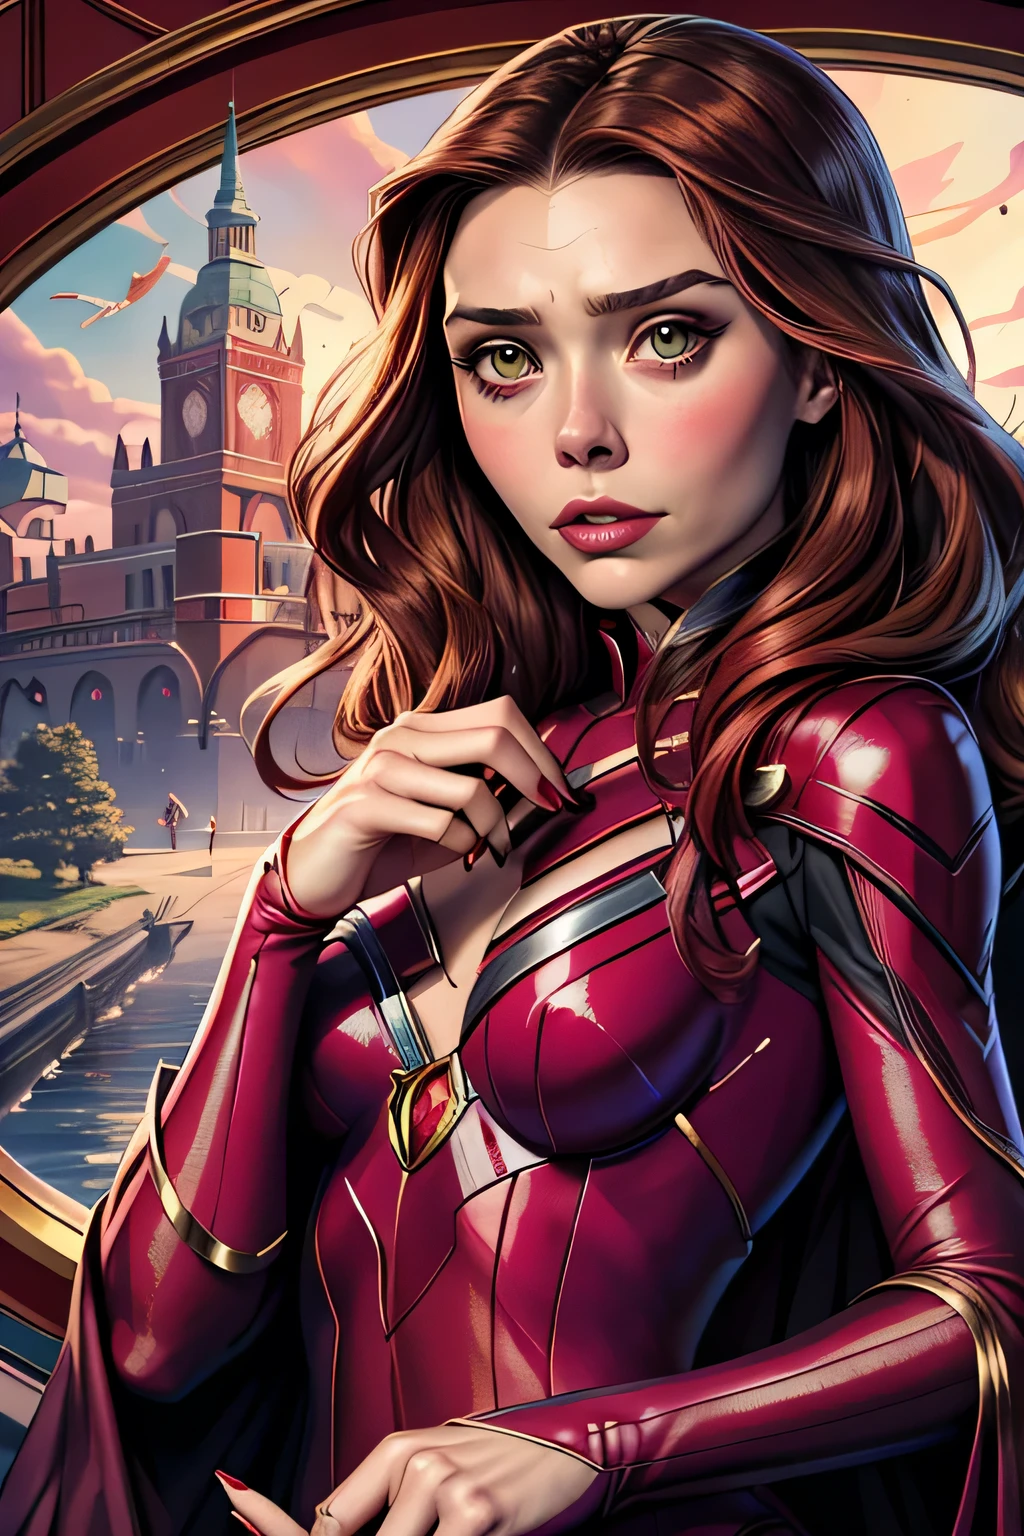 ((Highest quality)), ((masterpiece)), (family friendly), ((Elizabeth Olsen)), ((Scarlet Witch)), Perfect Face、Accurate、(Accurate hand and finger depiction)、(Accurate lip drawing)、(Accurate tongue depiction)、 Scarlet witch woman、Beautiful nails、Black nail polish、 (I&#39;m crawling on my stomach:1.5)、Browsing Caution, Vaginal intercourse, Woman standing on top, real vagina, anal sex, Real Anal, (Crying face:1.4)、close your eyes、blush、Open your mouth、(sweating:1.1)、Plump body、Big Breasts、Narrow waist、BIG ASS、glamorous、glamorous、cinematic, (complex:1.4), Low contrast、Side lighting, Best Shadow, (View from the front)、(In the deep dark forest)、(Autumn leaves on tree々Surrounded by)、(The ground is covered with leaves and tree roots..)、(vapour:1.3)、Browsing Caution, penis、(With projectile:1.4), (Excessive ejaculation:1.5)、((2penis:1.2)), (2penis grows out of the ground.1.3)